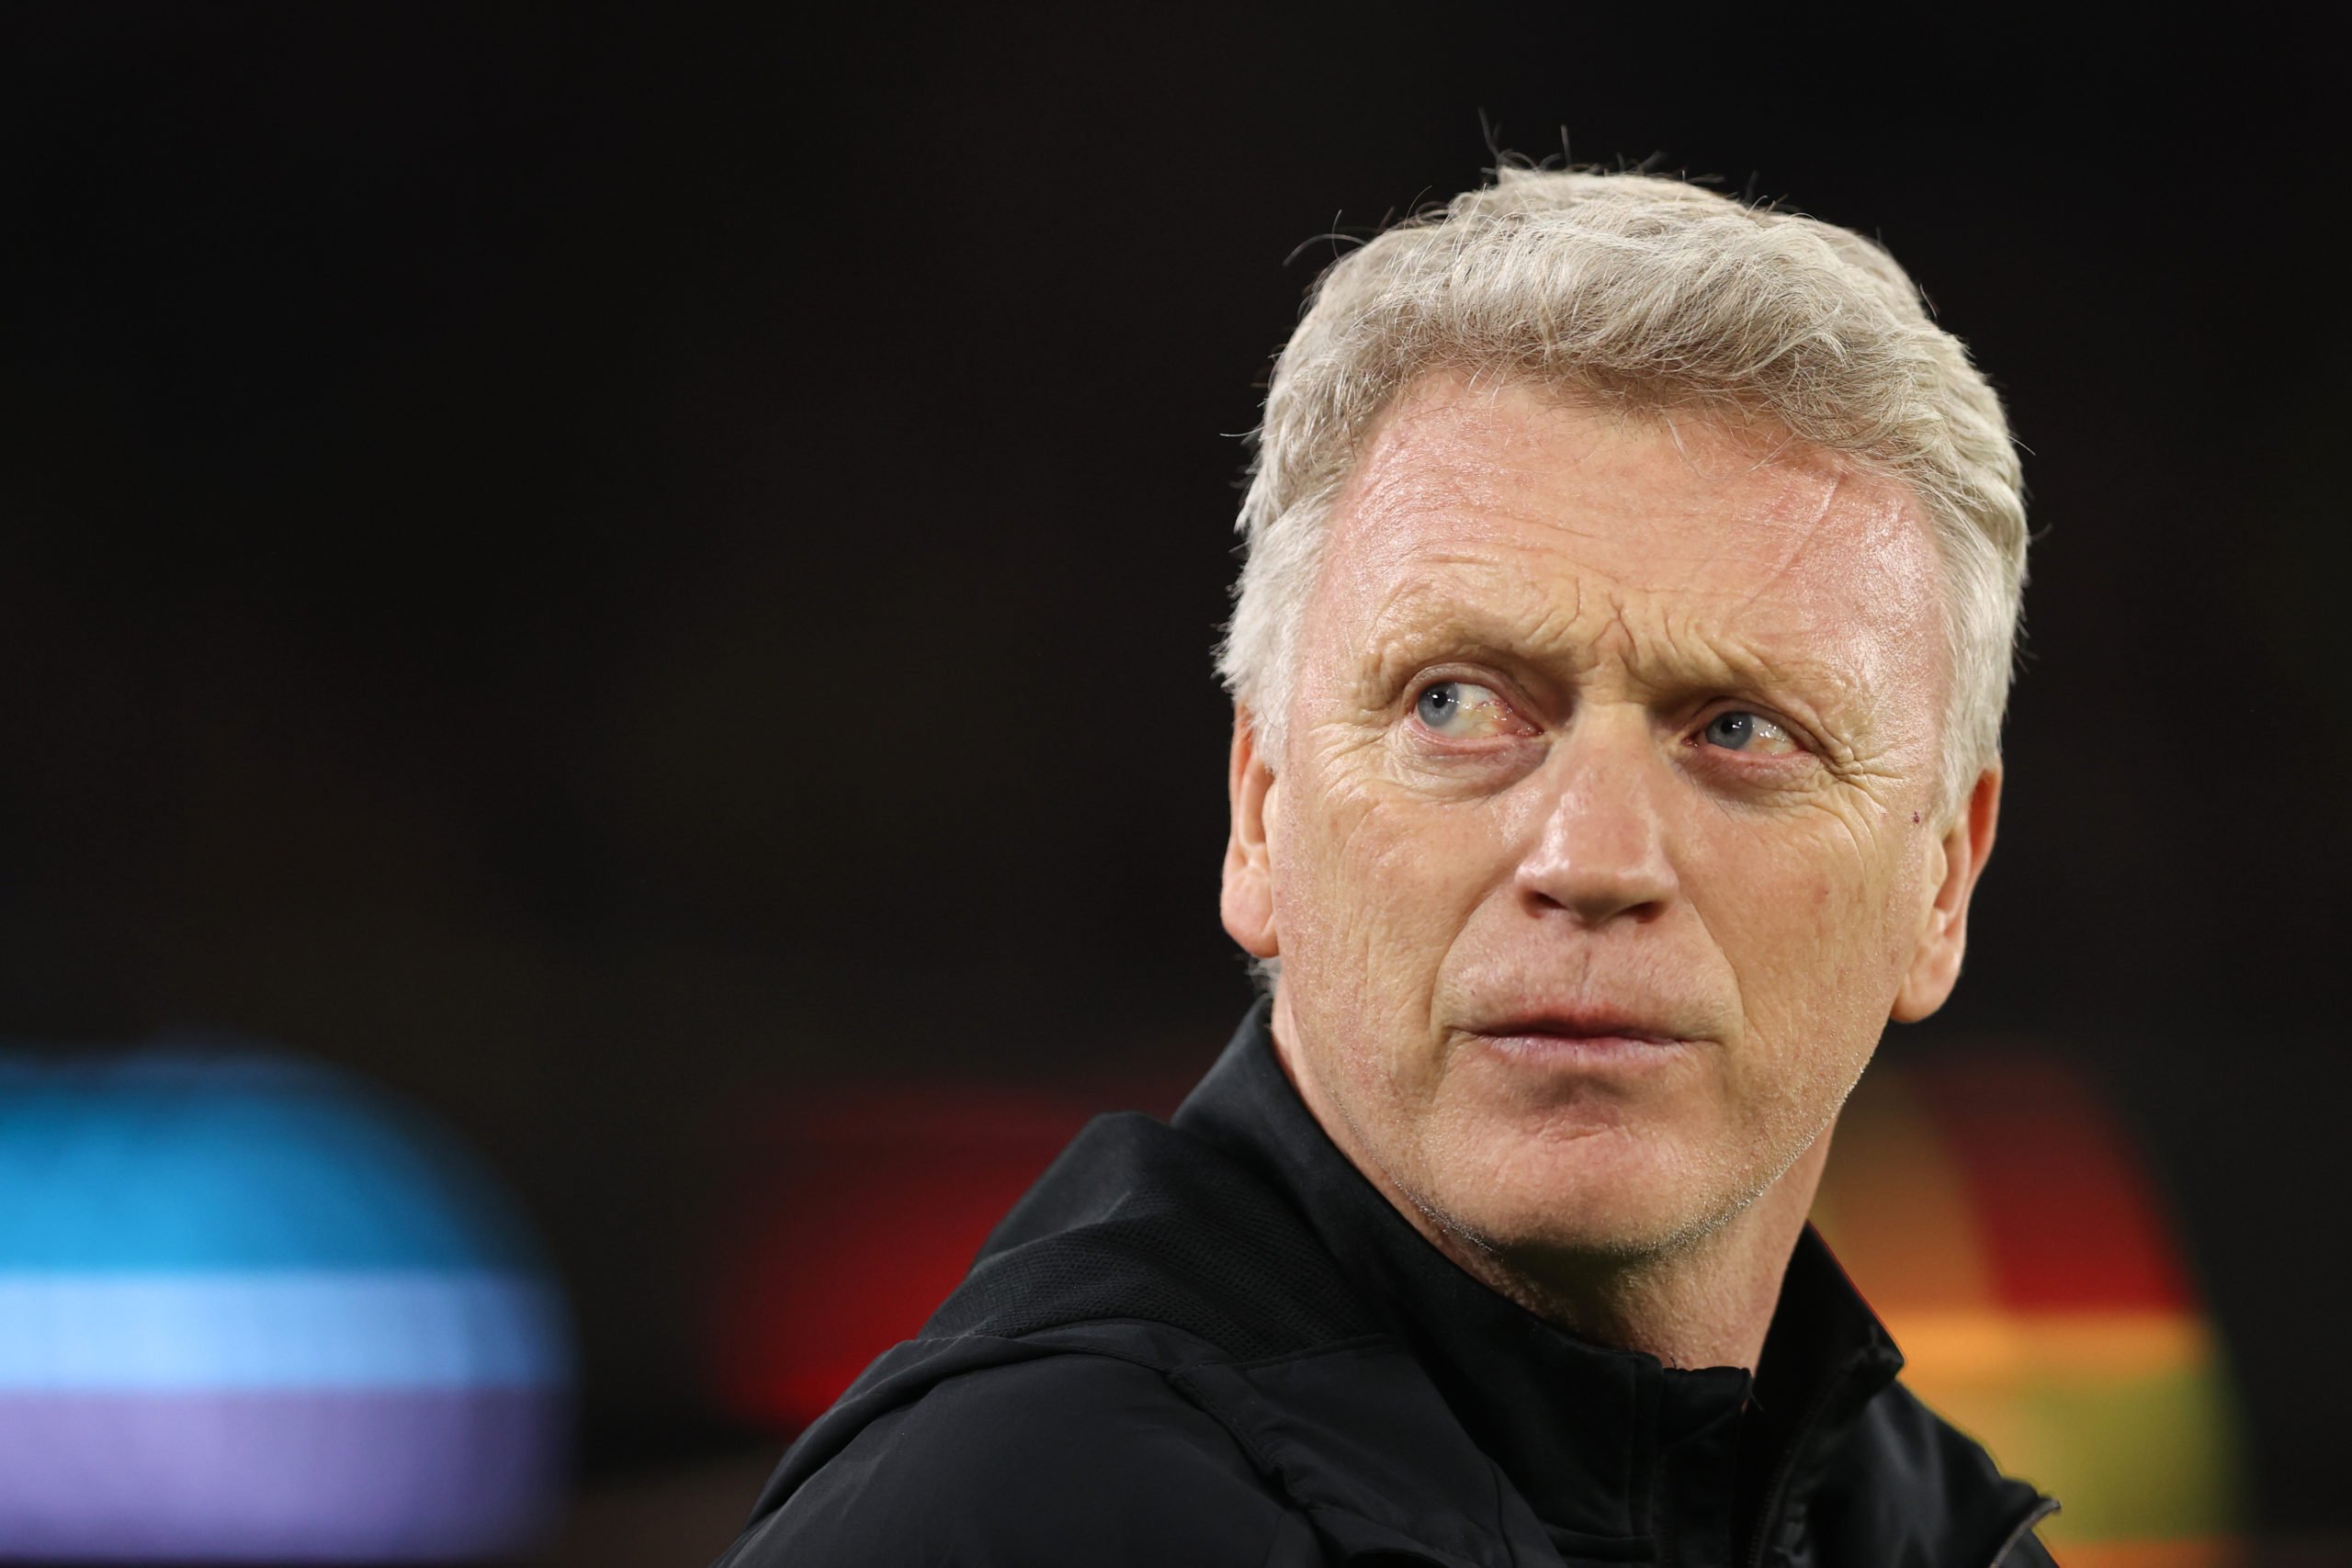 David Moyes says he 'can't complain' as West Ham give Spurs Champions League leg up with lethargic display